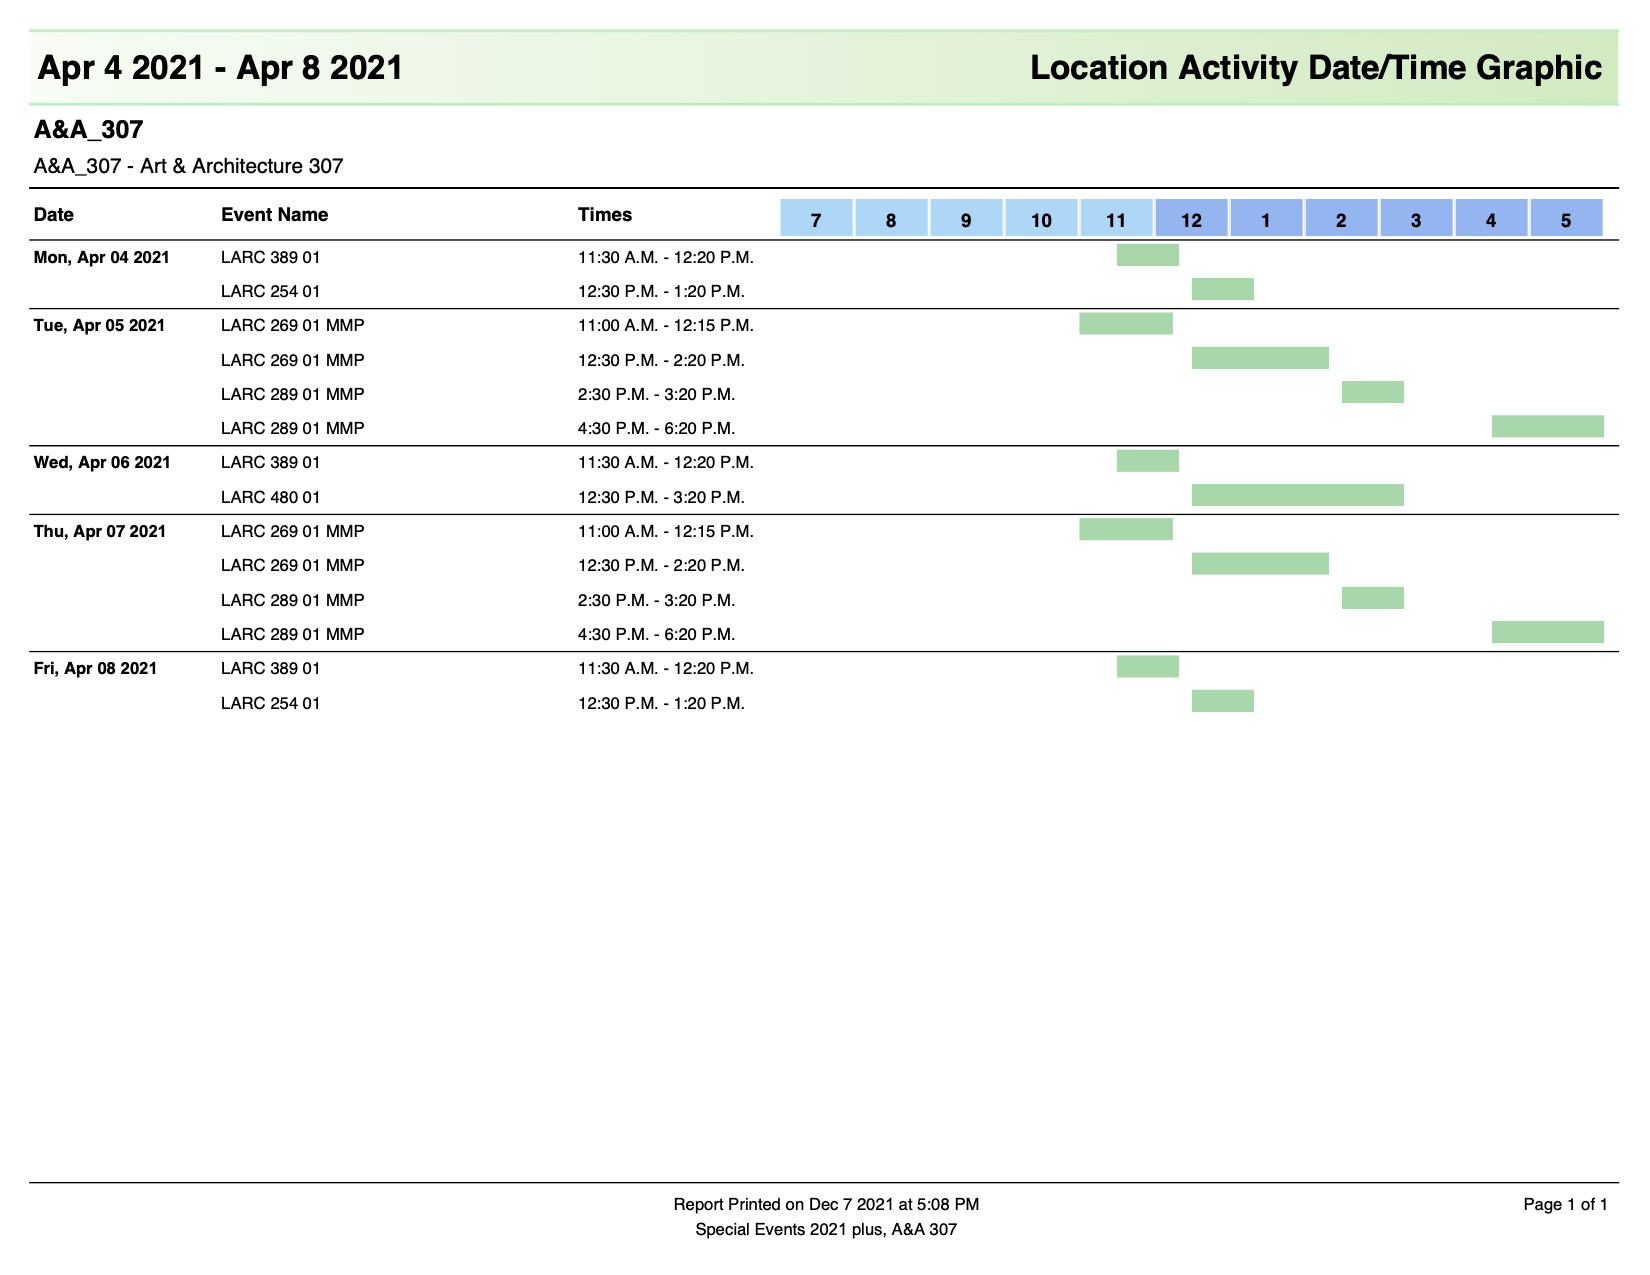 Location activity date/time graphic expand